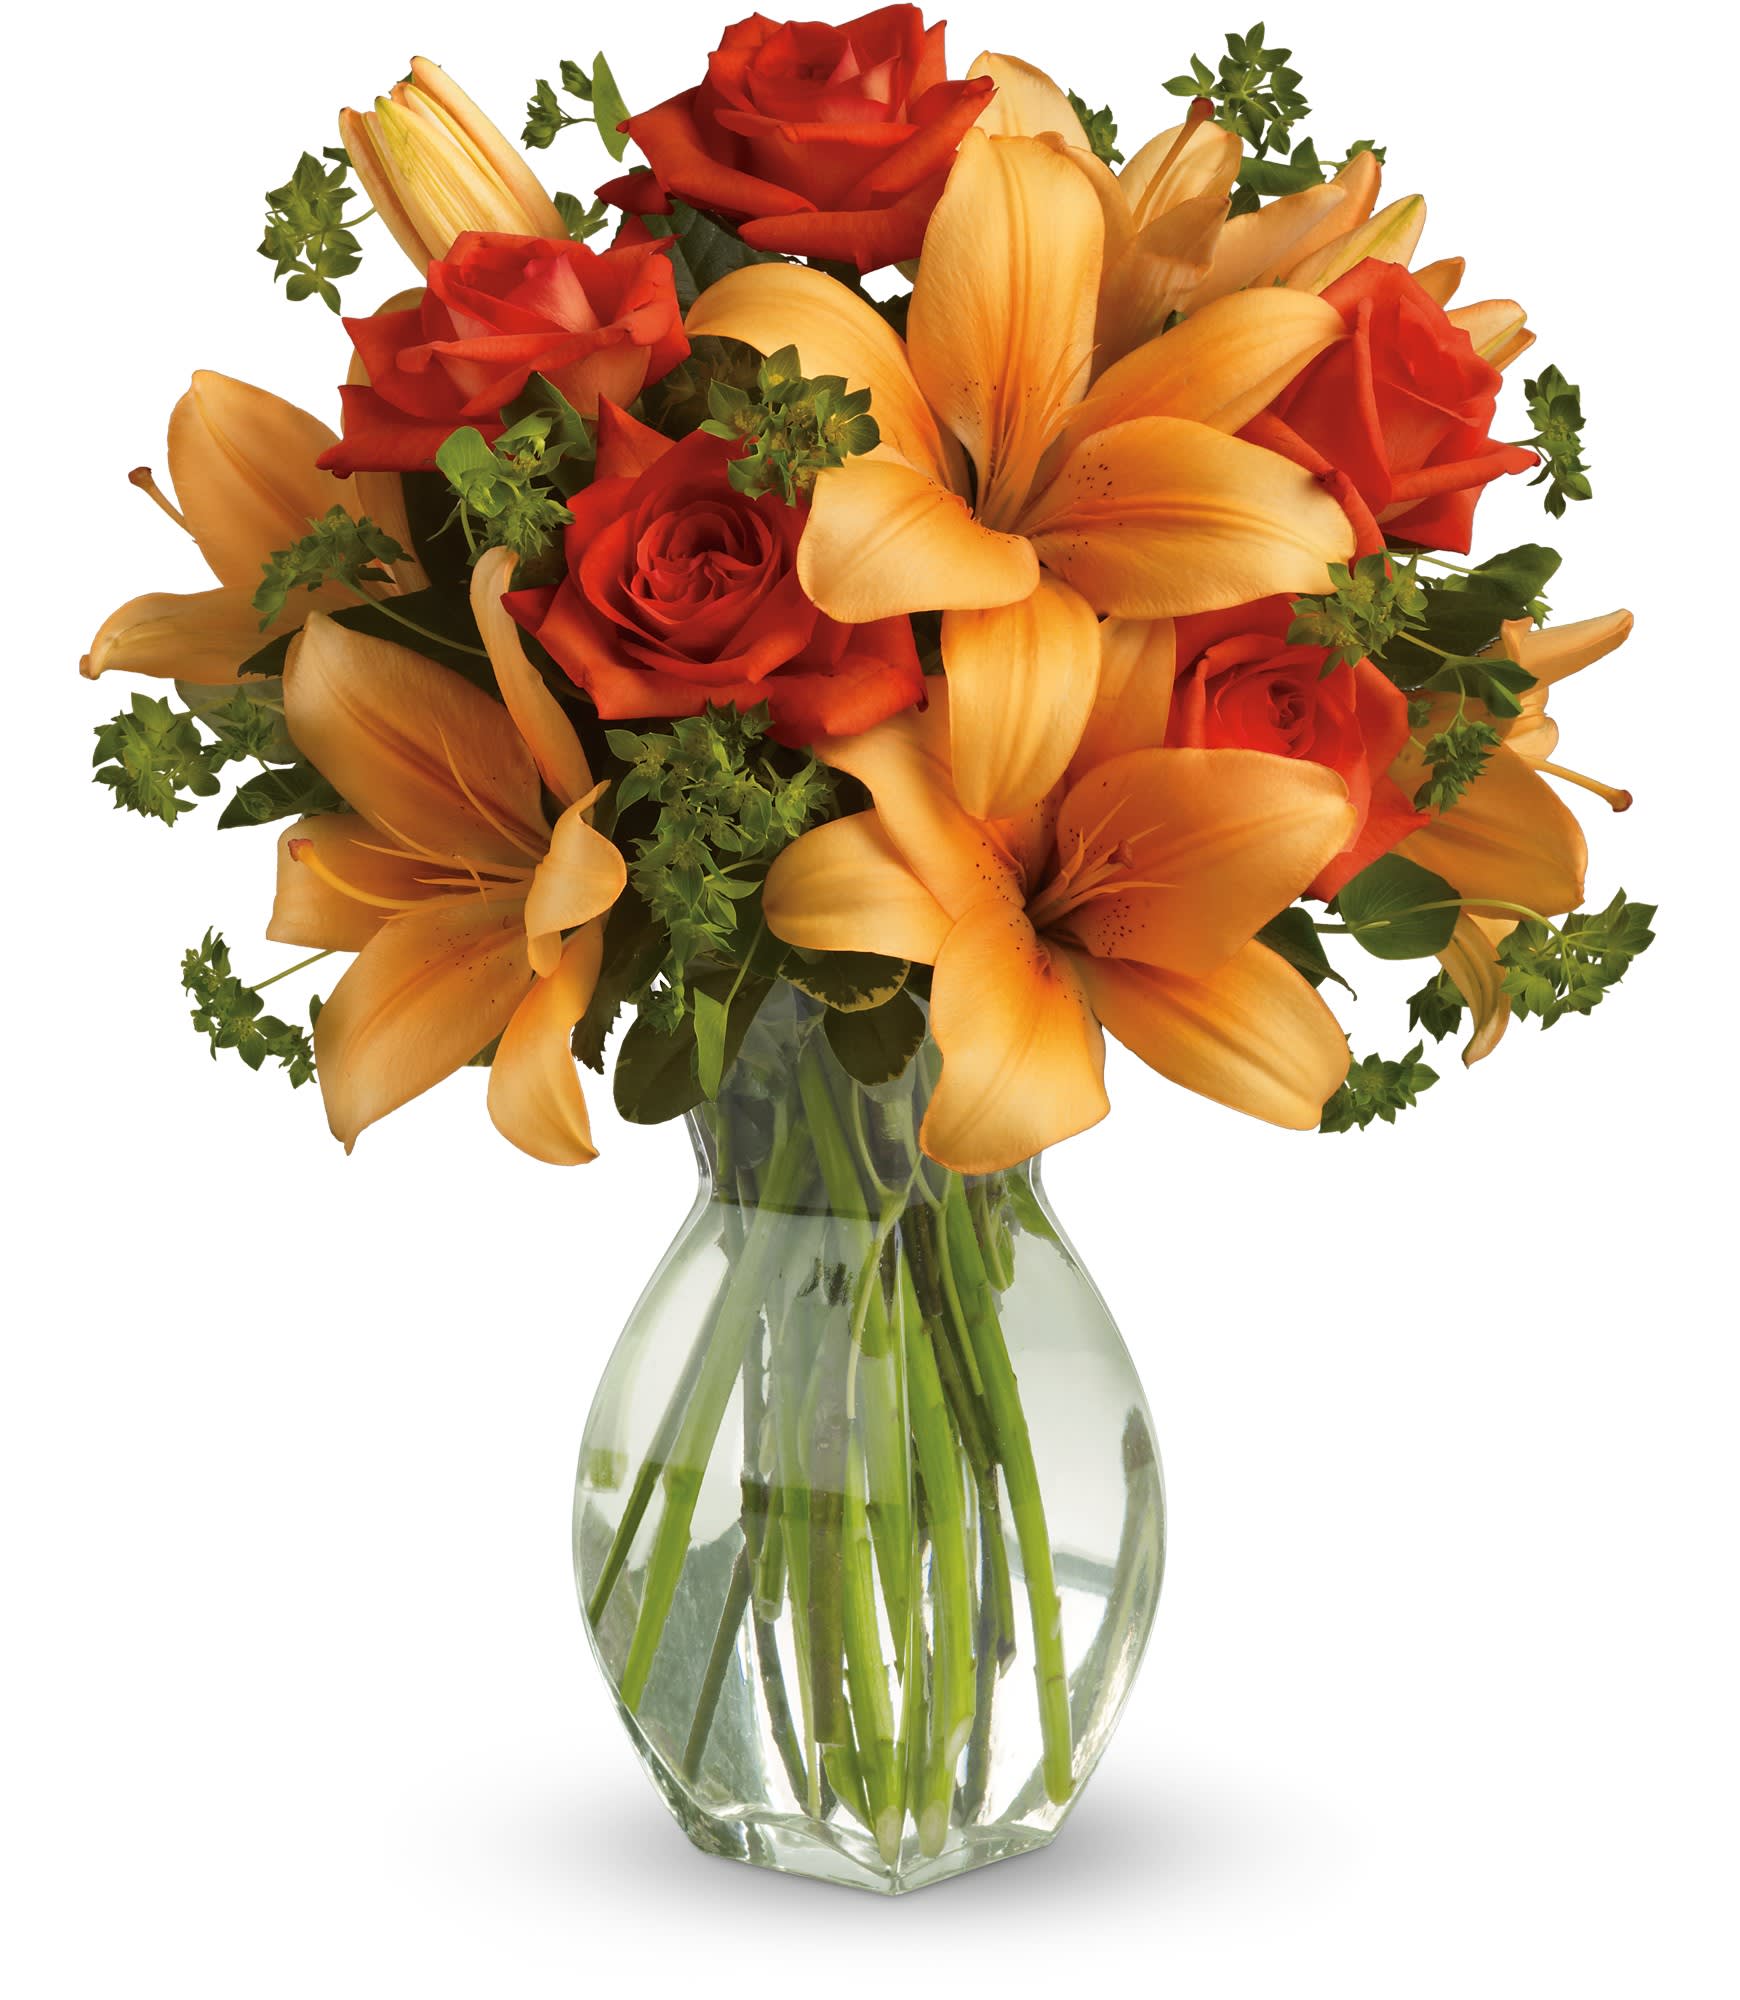 Fiery Lily and Rose - Spark someone's attention by sending this absolutely radiant bouquet. Full of flowers and fiery beauty, it makes a beautiful gift for any occasion.